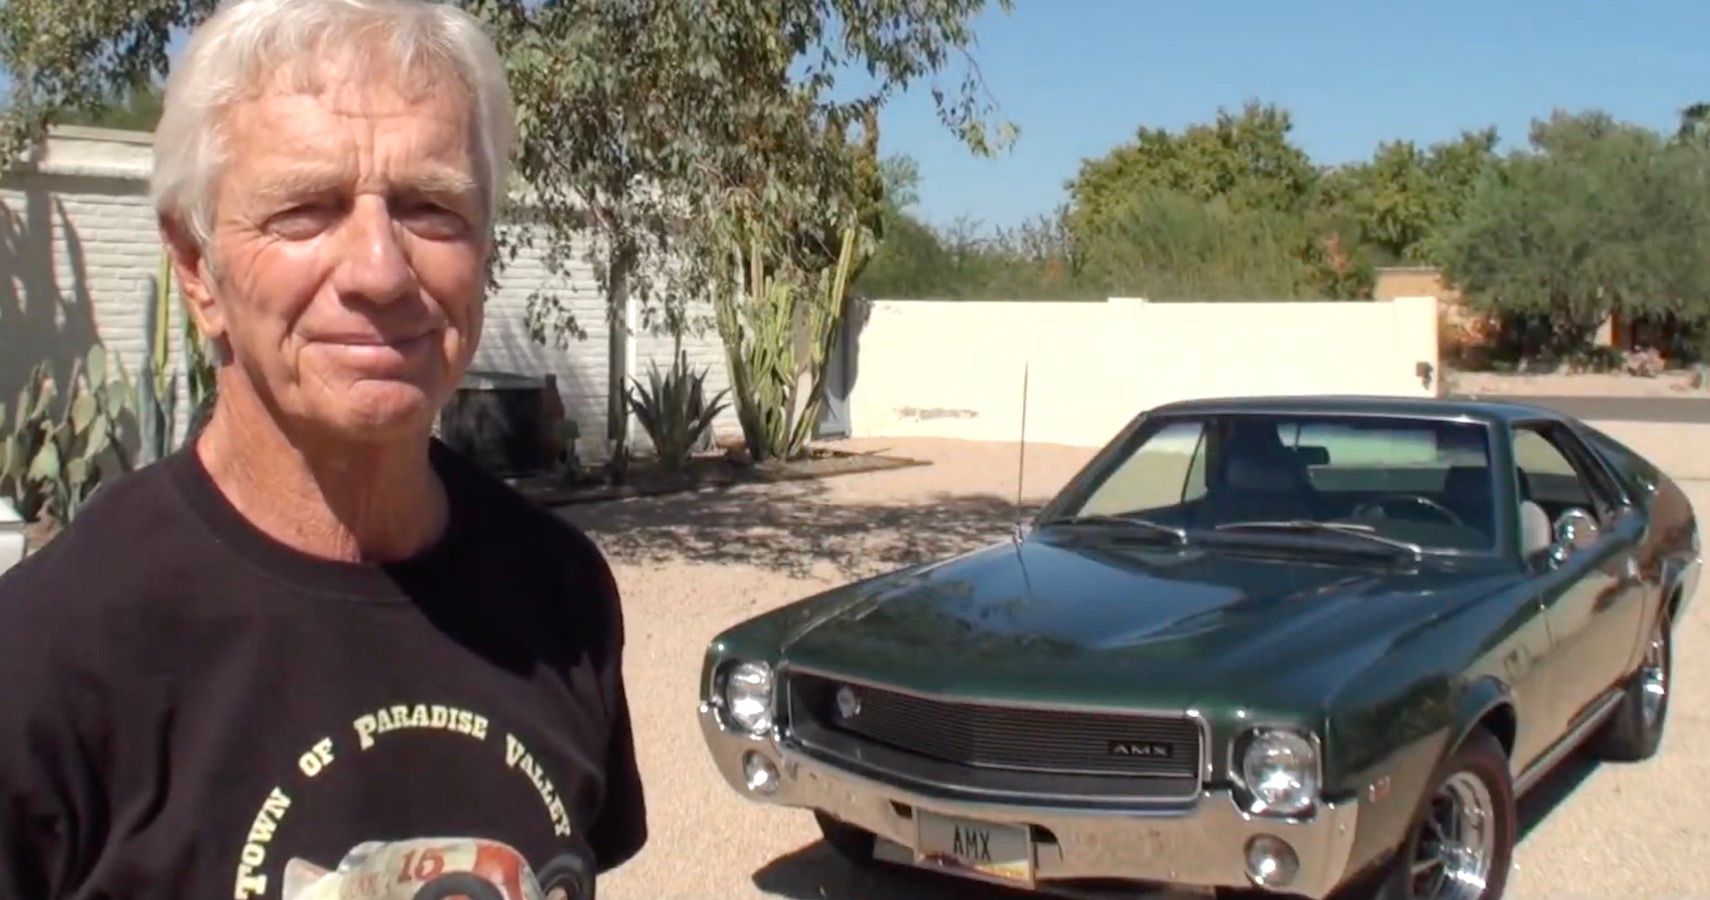 American Muscle Car Loyalty: Proud Original Owner Still Drives His 1969 AMC AMX Today